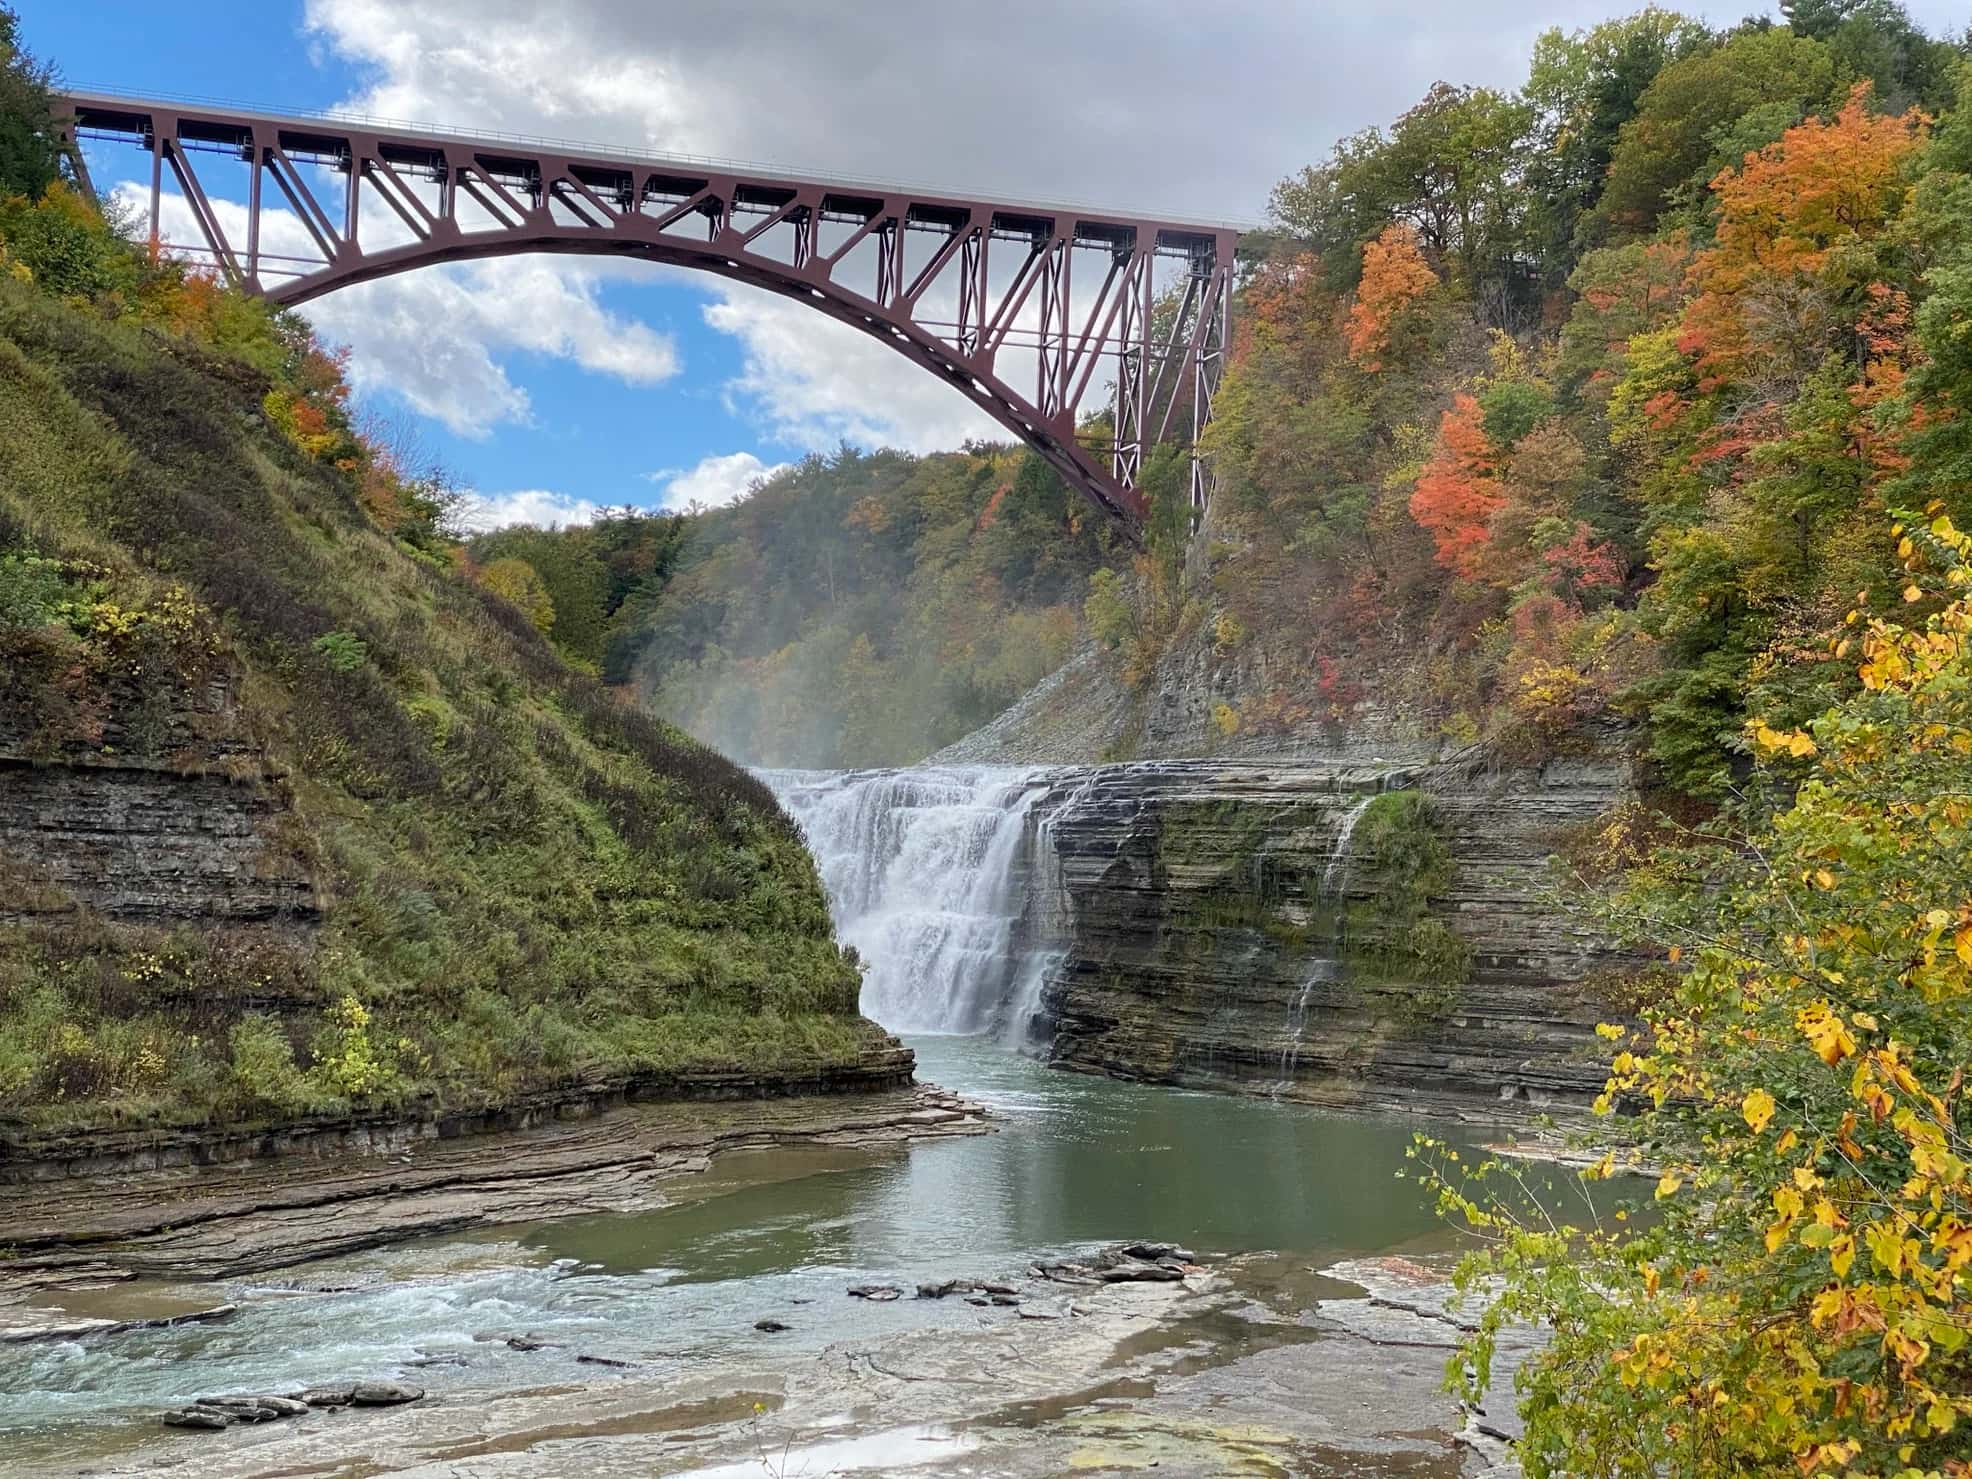 Iron bridge stretching over a rocky canyon with a waterfall down below surrounded by forests beginning to turn color in the autumn.